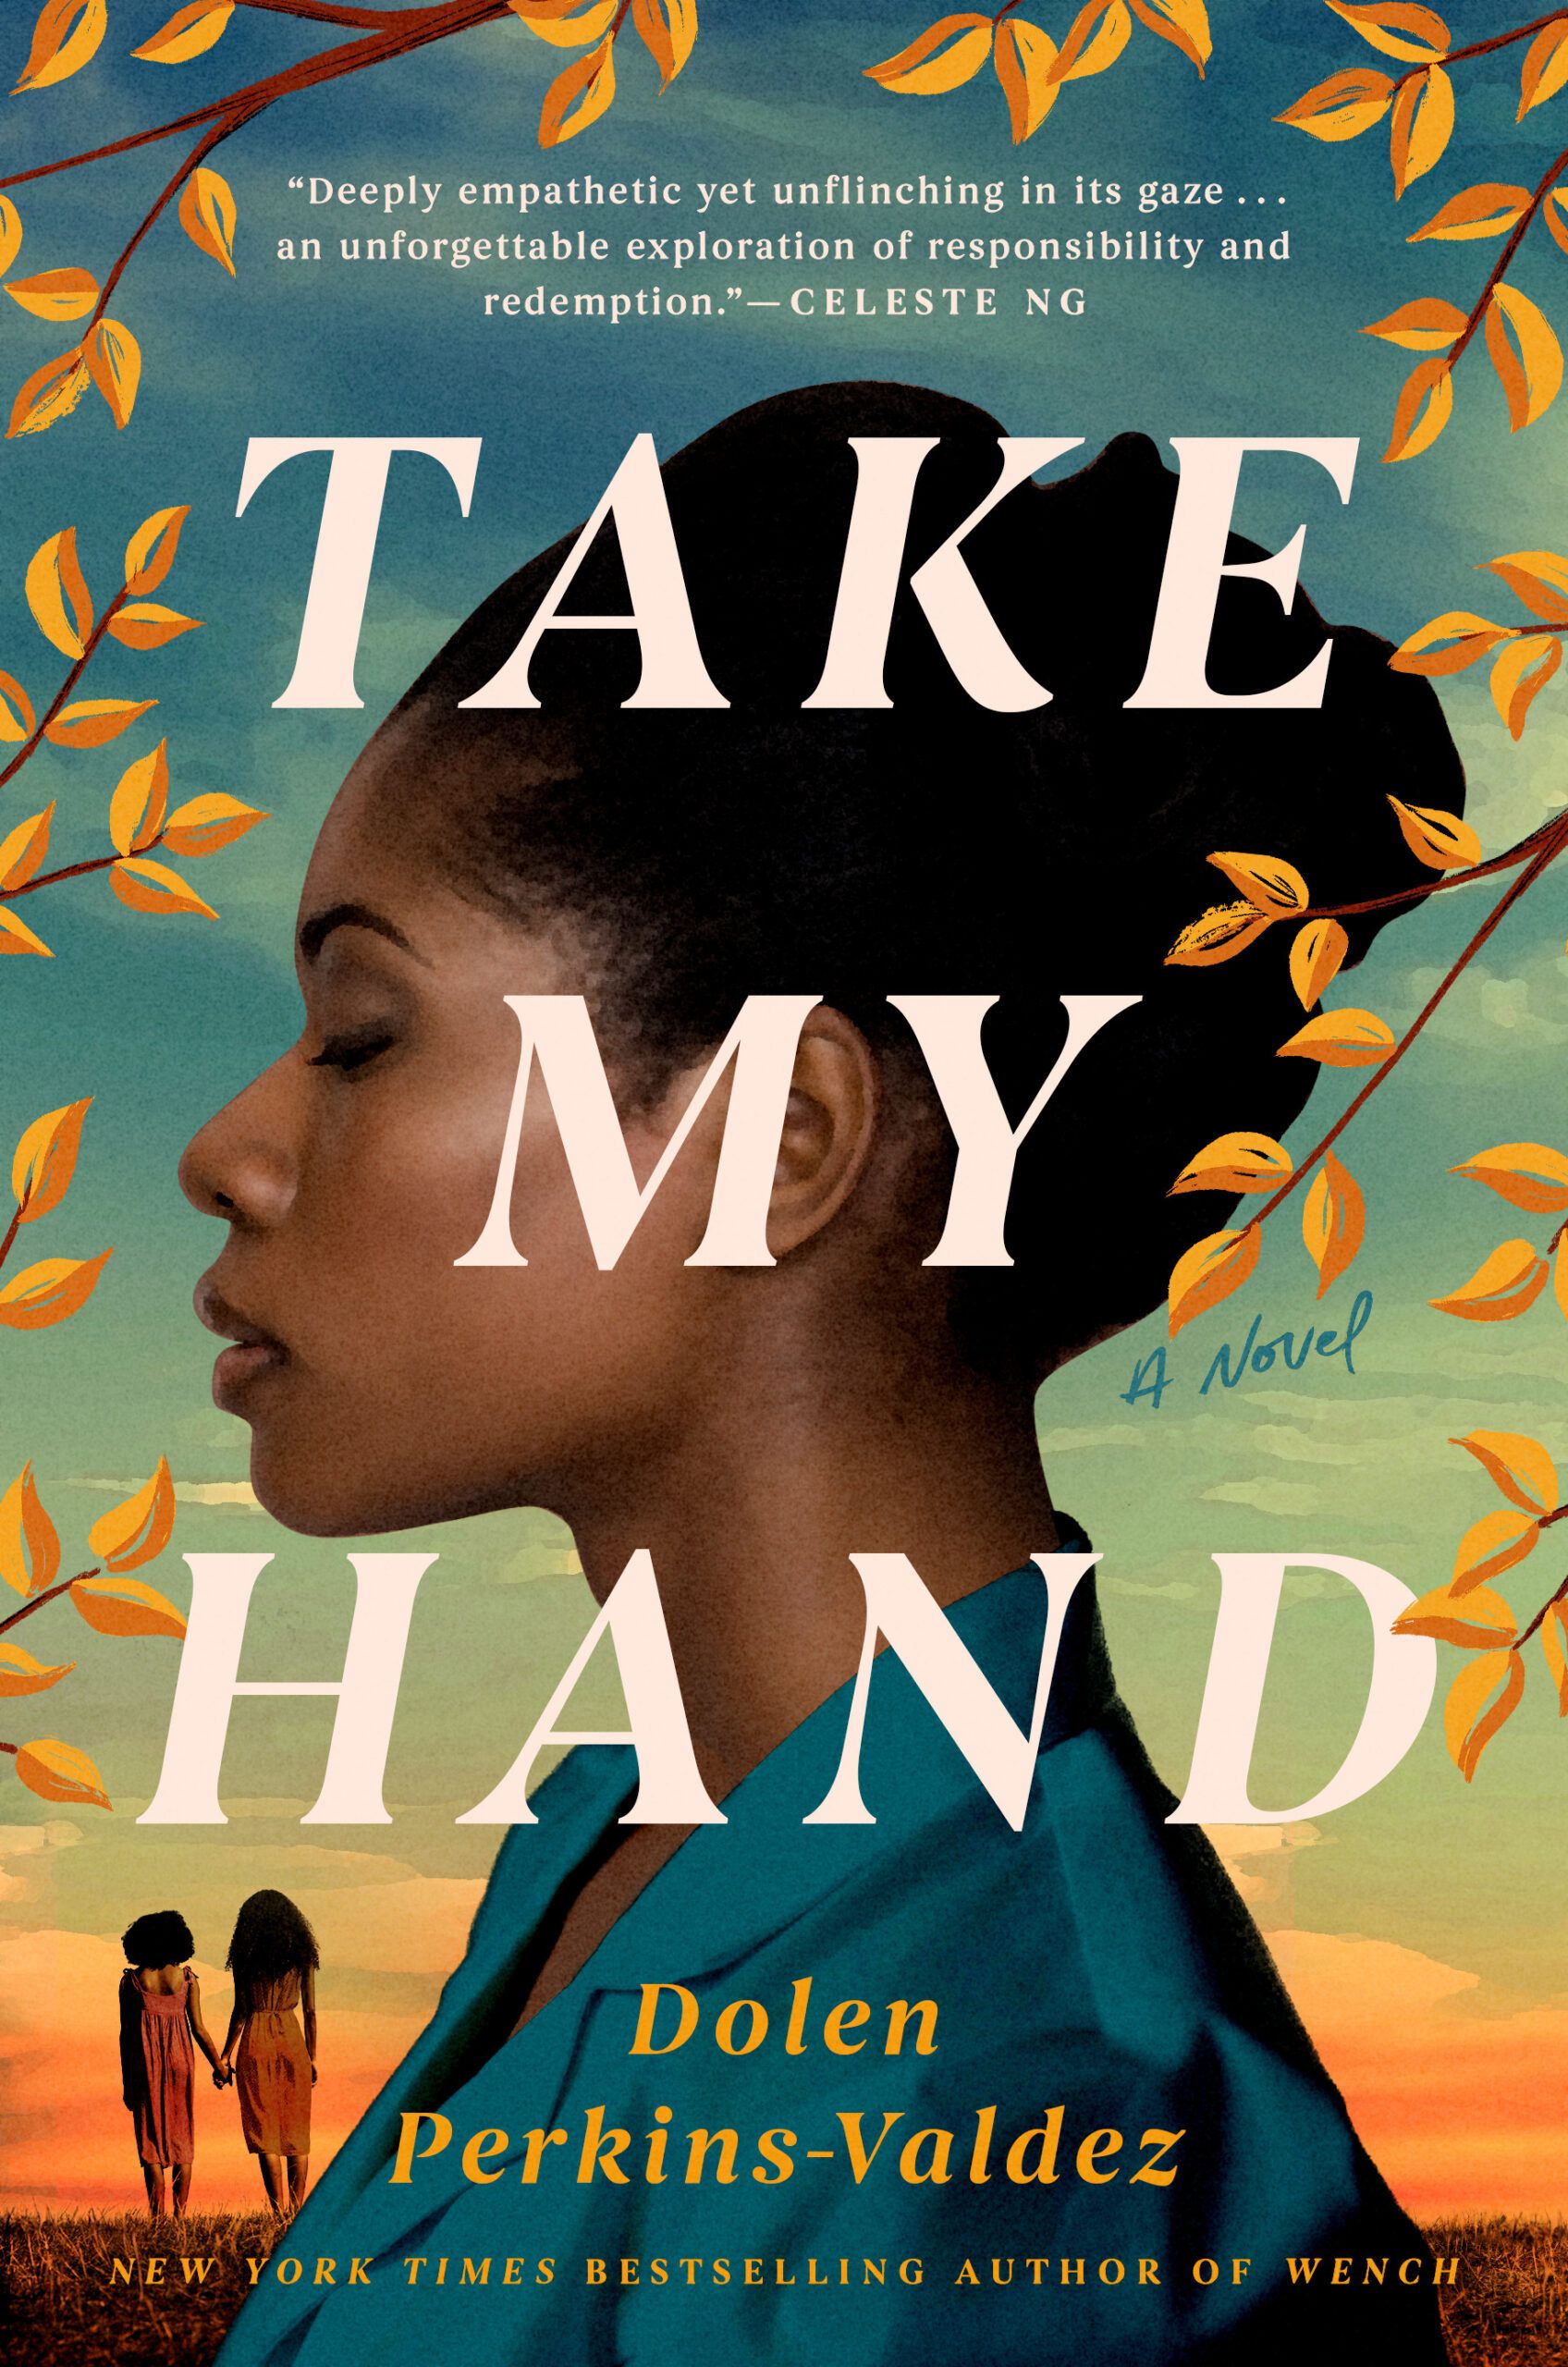 Cover image for "Take My Hand" by Dolen Perkins-Valdez.